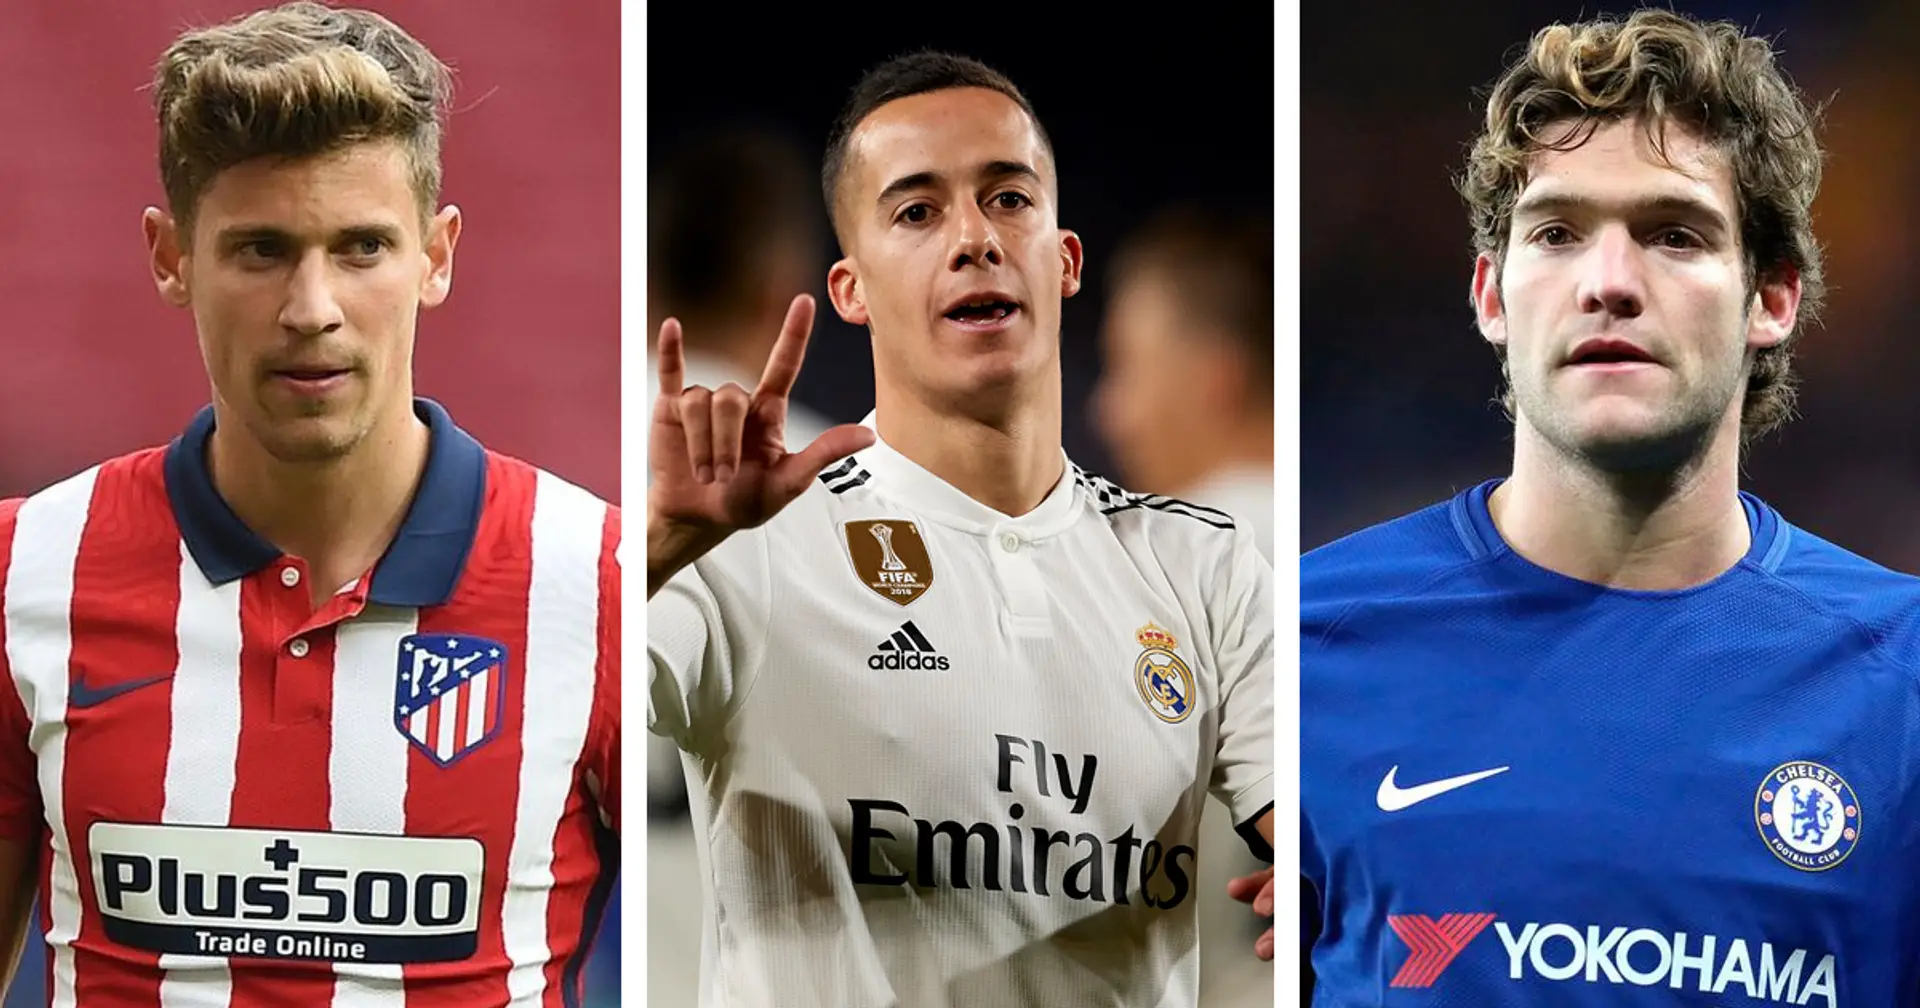 44 Real Madrid Academy graduates play in Europe's top 5 leagues